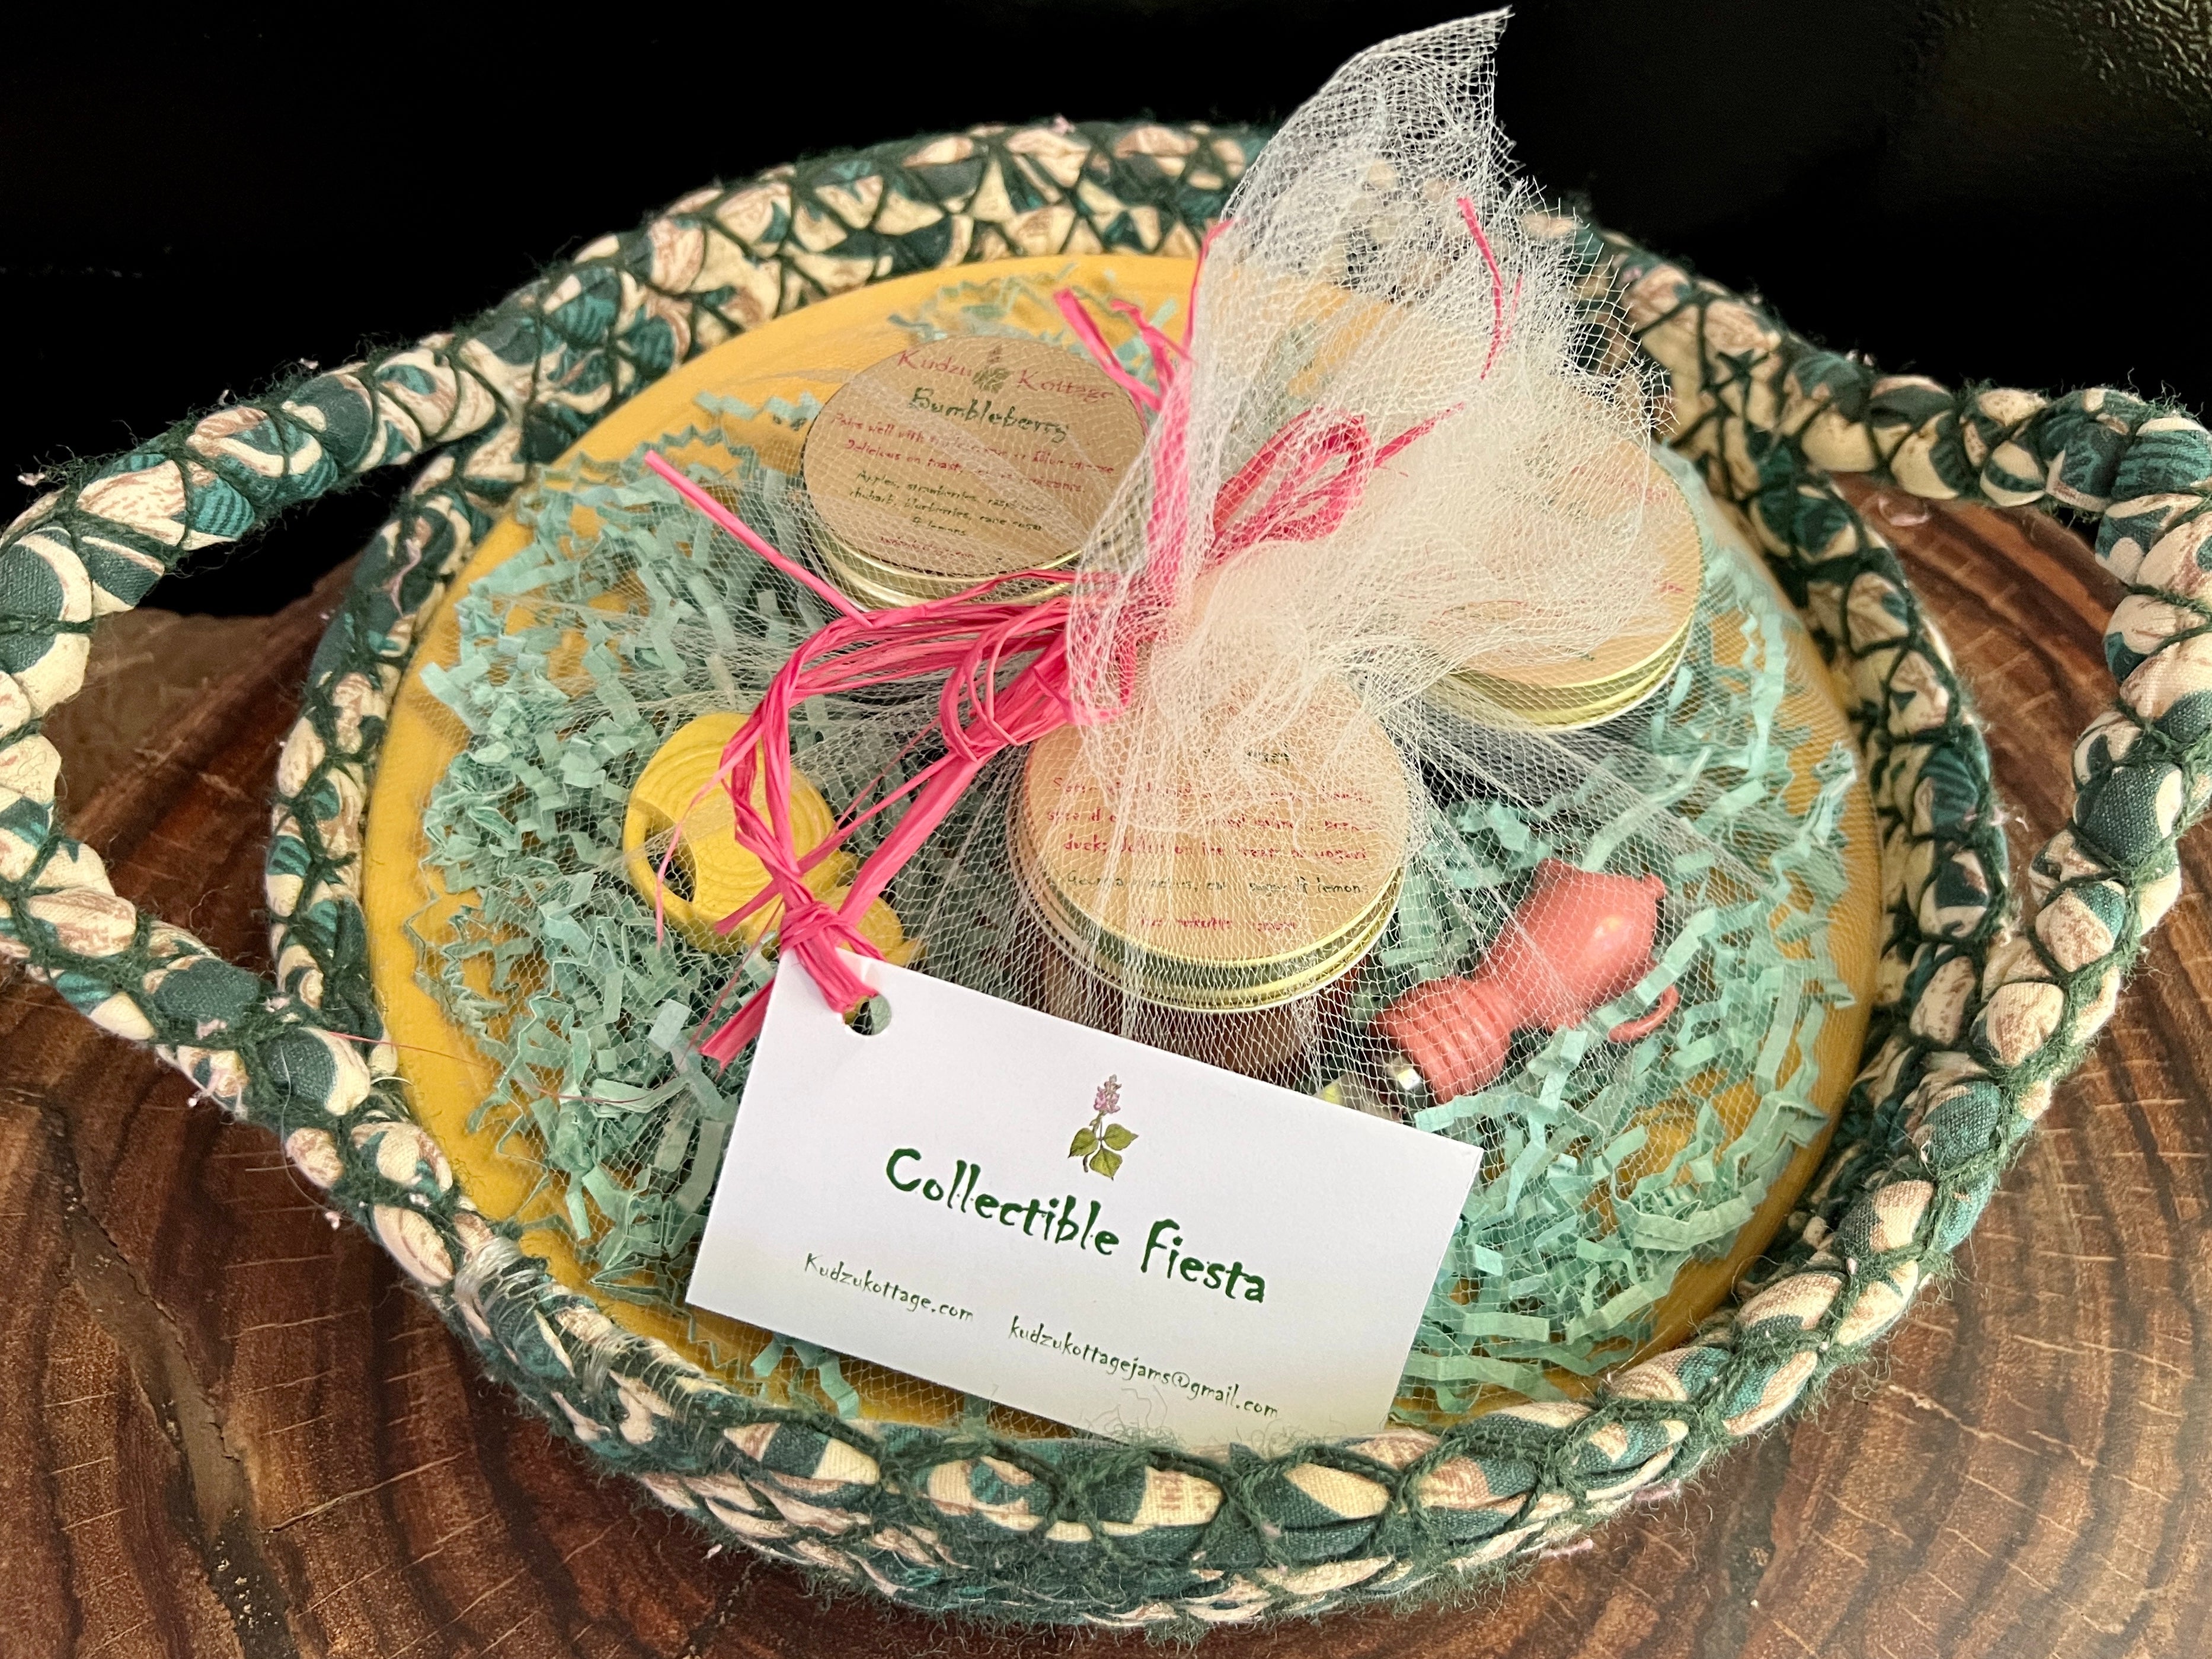 Collectible Fiesta Plate in Fabric Rope Gift Basket